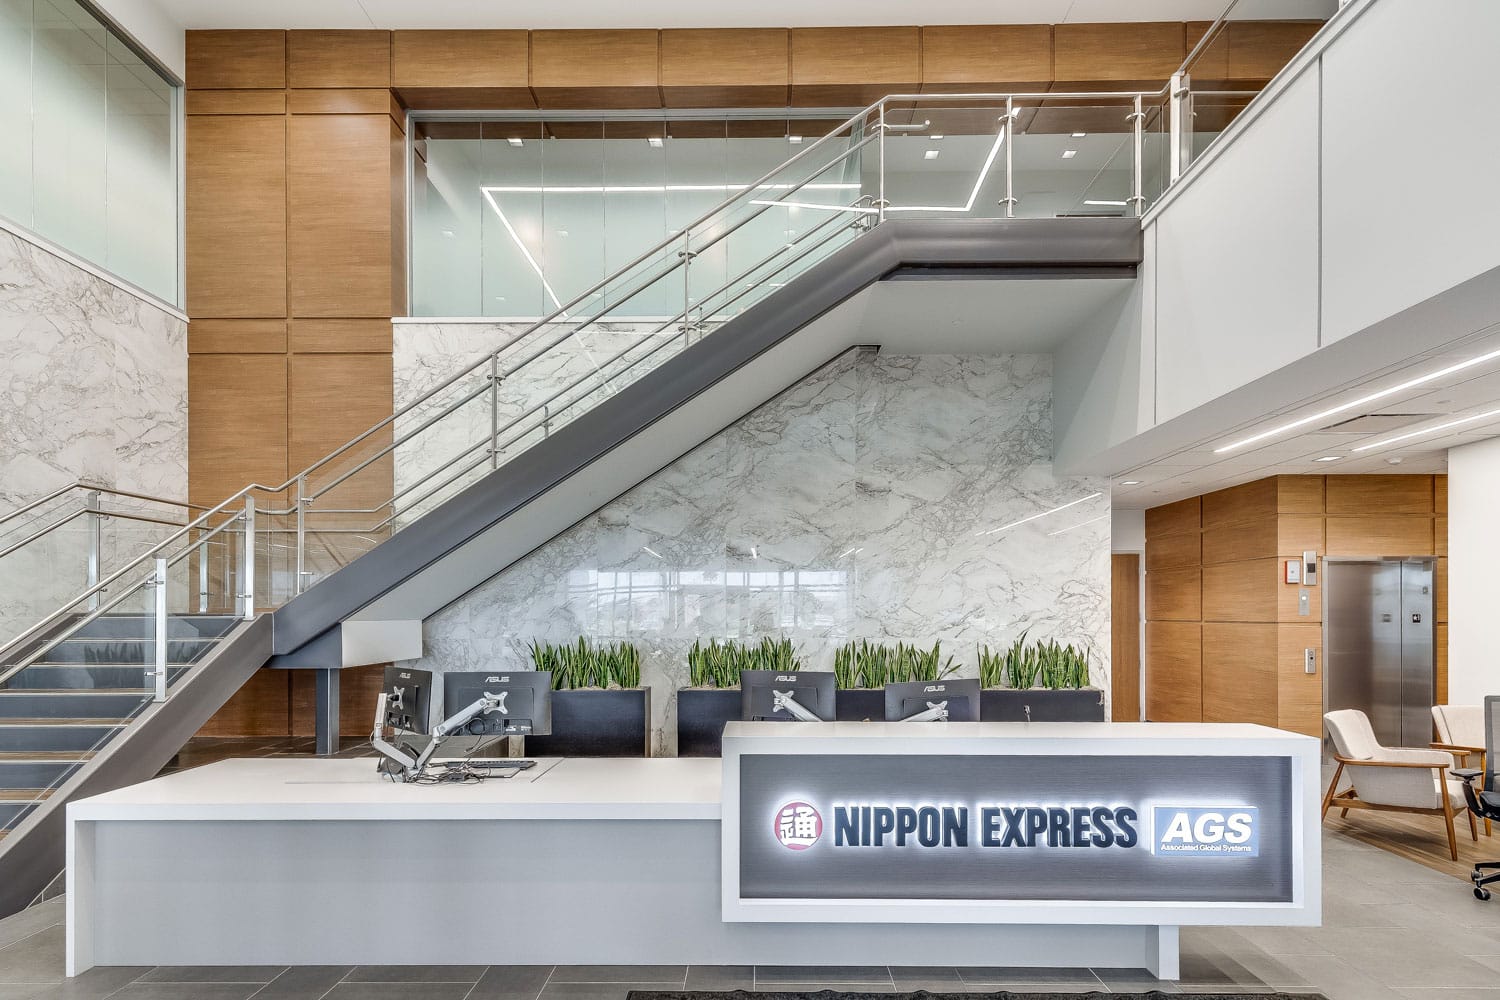 Image of Nippon Express 6 1 in São Paulo’s leading business group uses Dekton in its new elegant offices - Cosentino